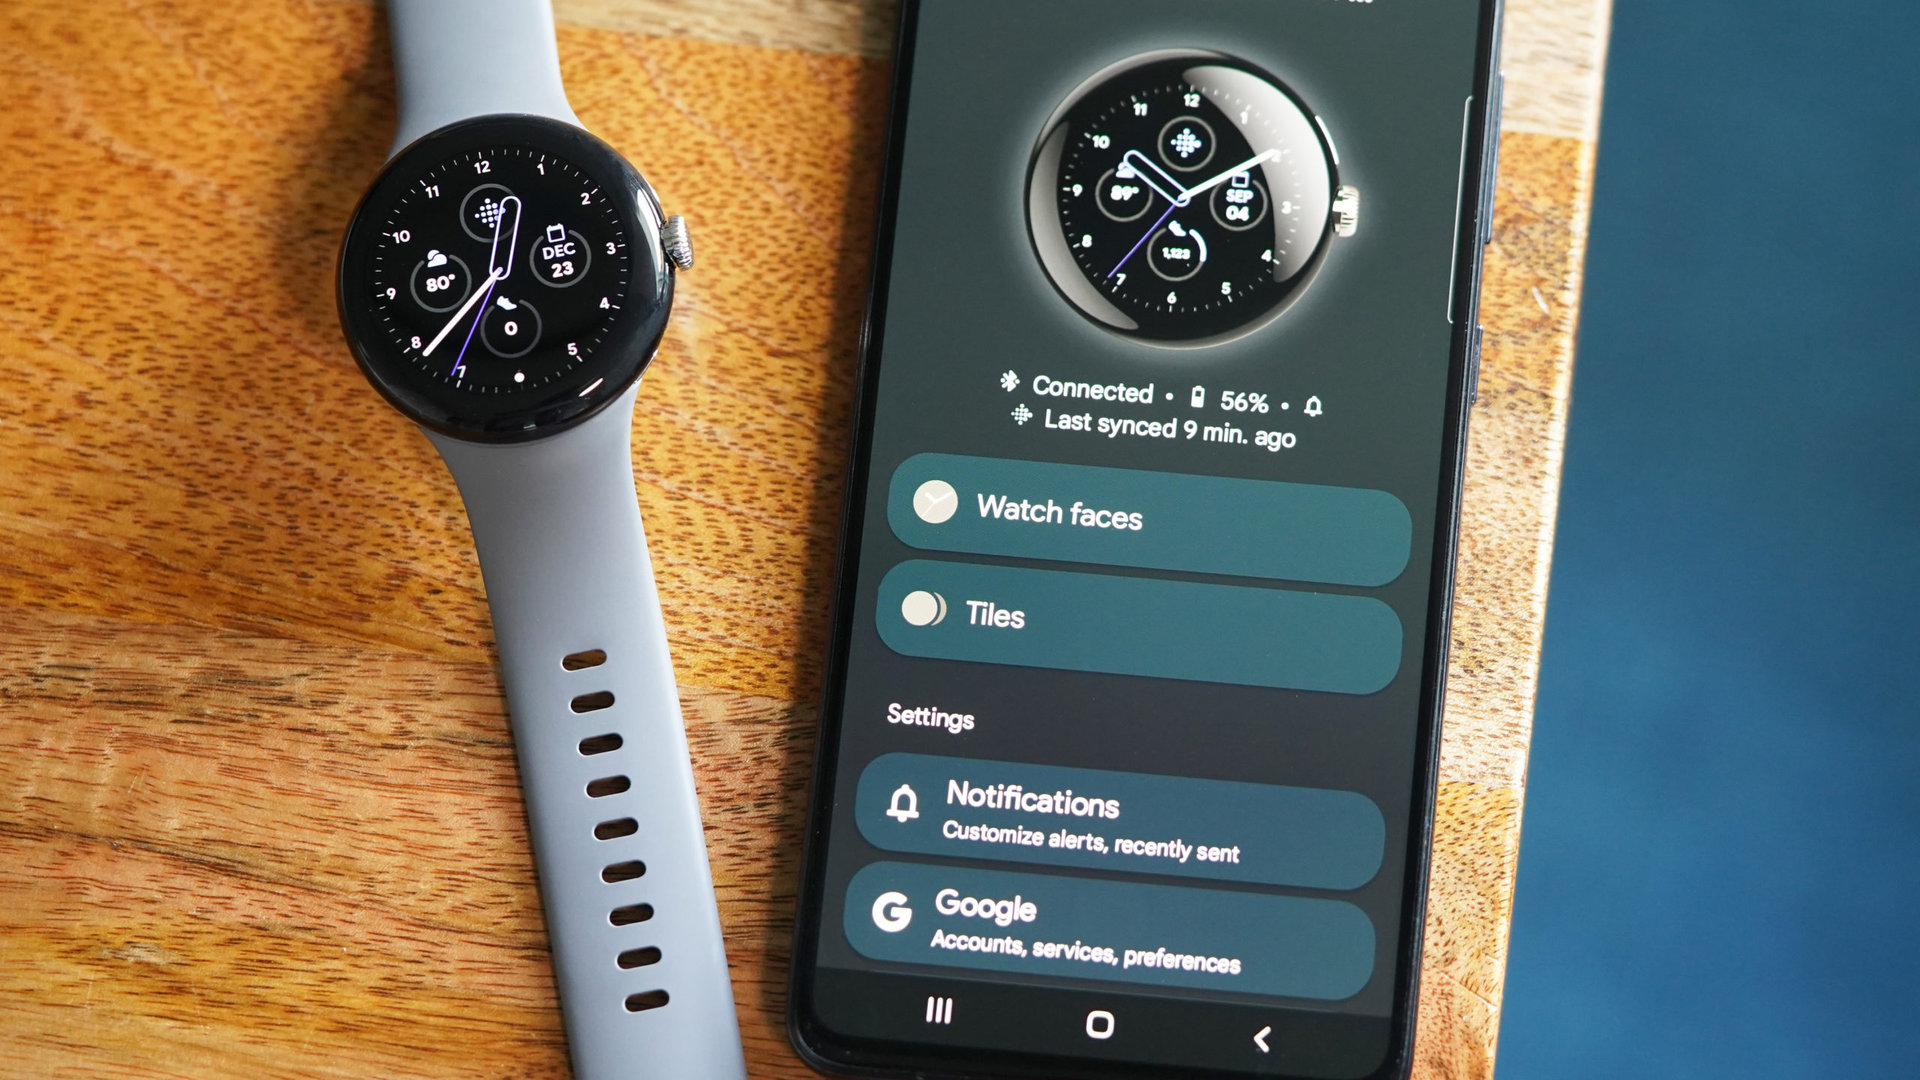 A Galaxy A51 displays the Home screen of the Pixel Watch app.